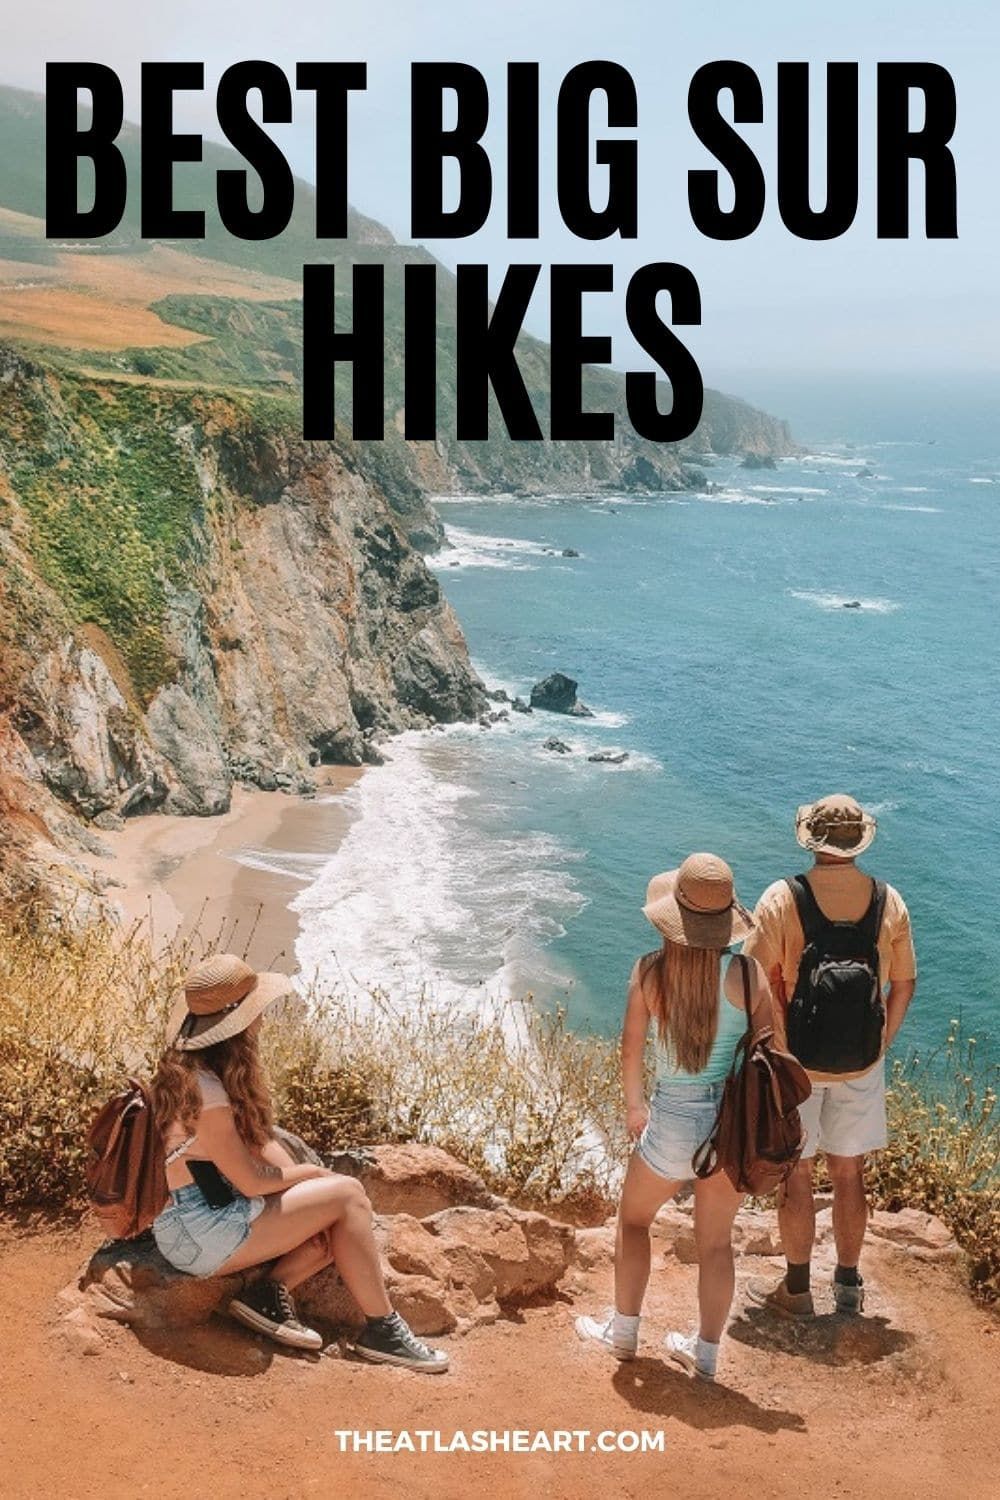 24 Best Big Sur Hikes to Explore One of the Most Beautiful Areas in California